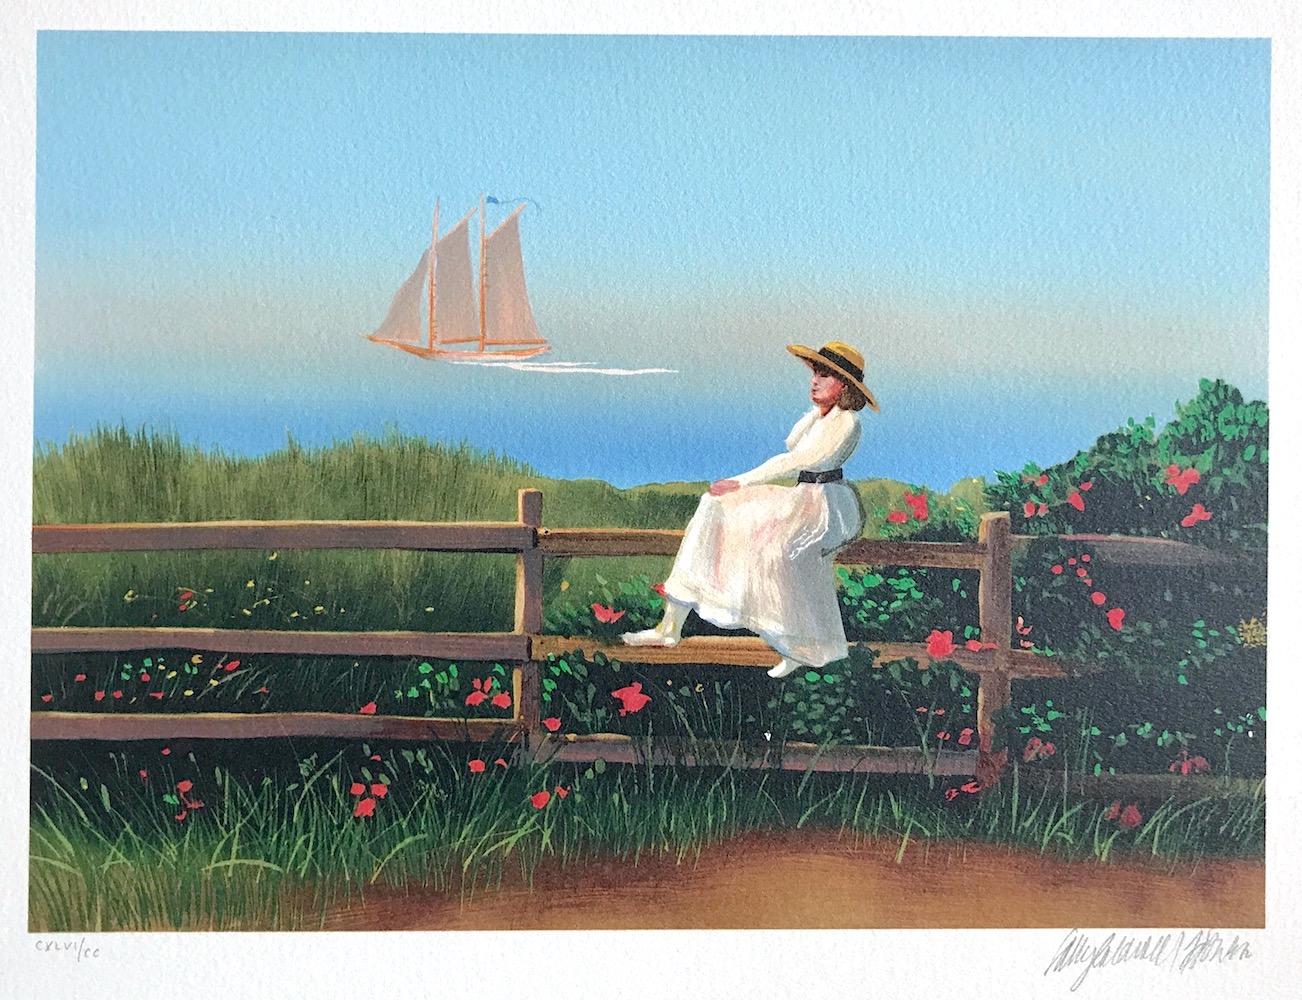 DREAMING Signed Lithograph, Woman Sitting on Fence, New England Summer, Sailing - Print by Sally Caldwell-Fisher